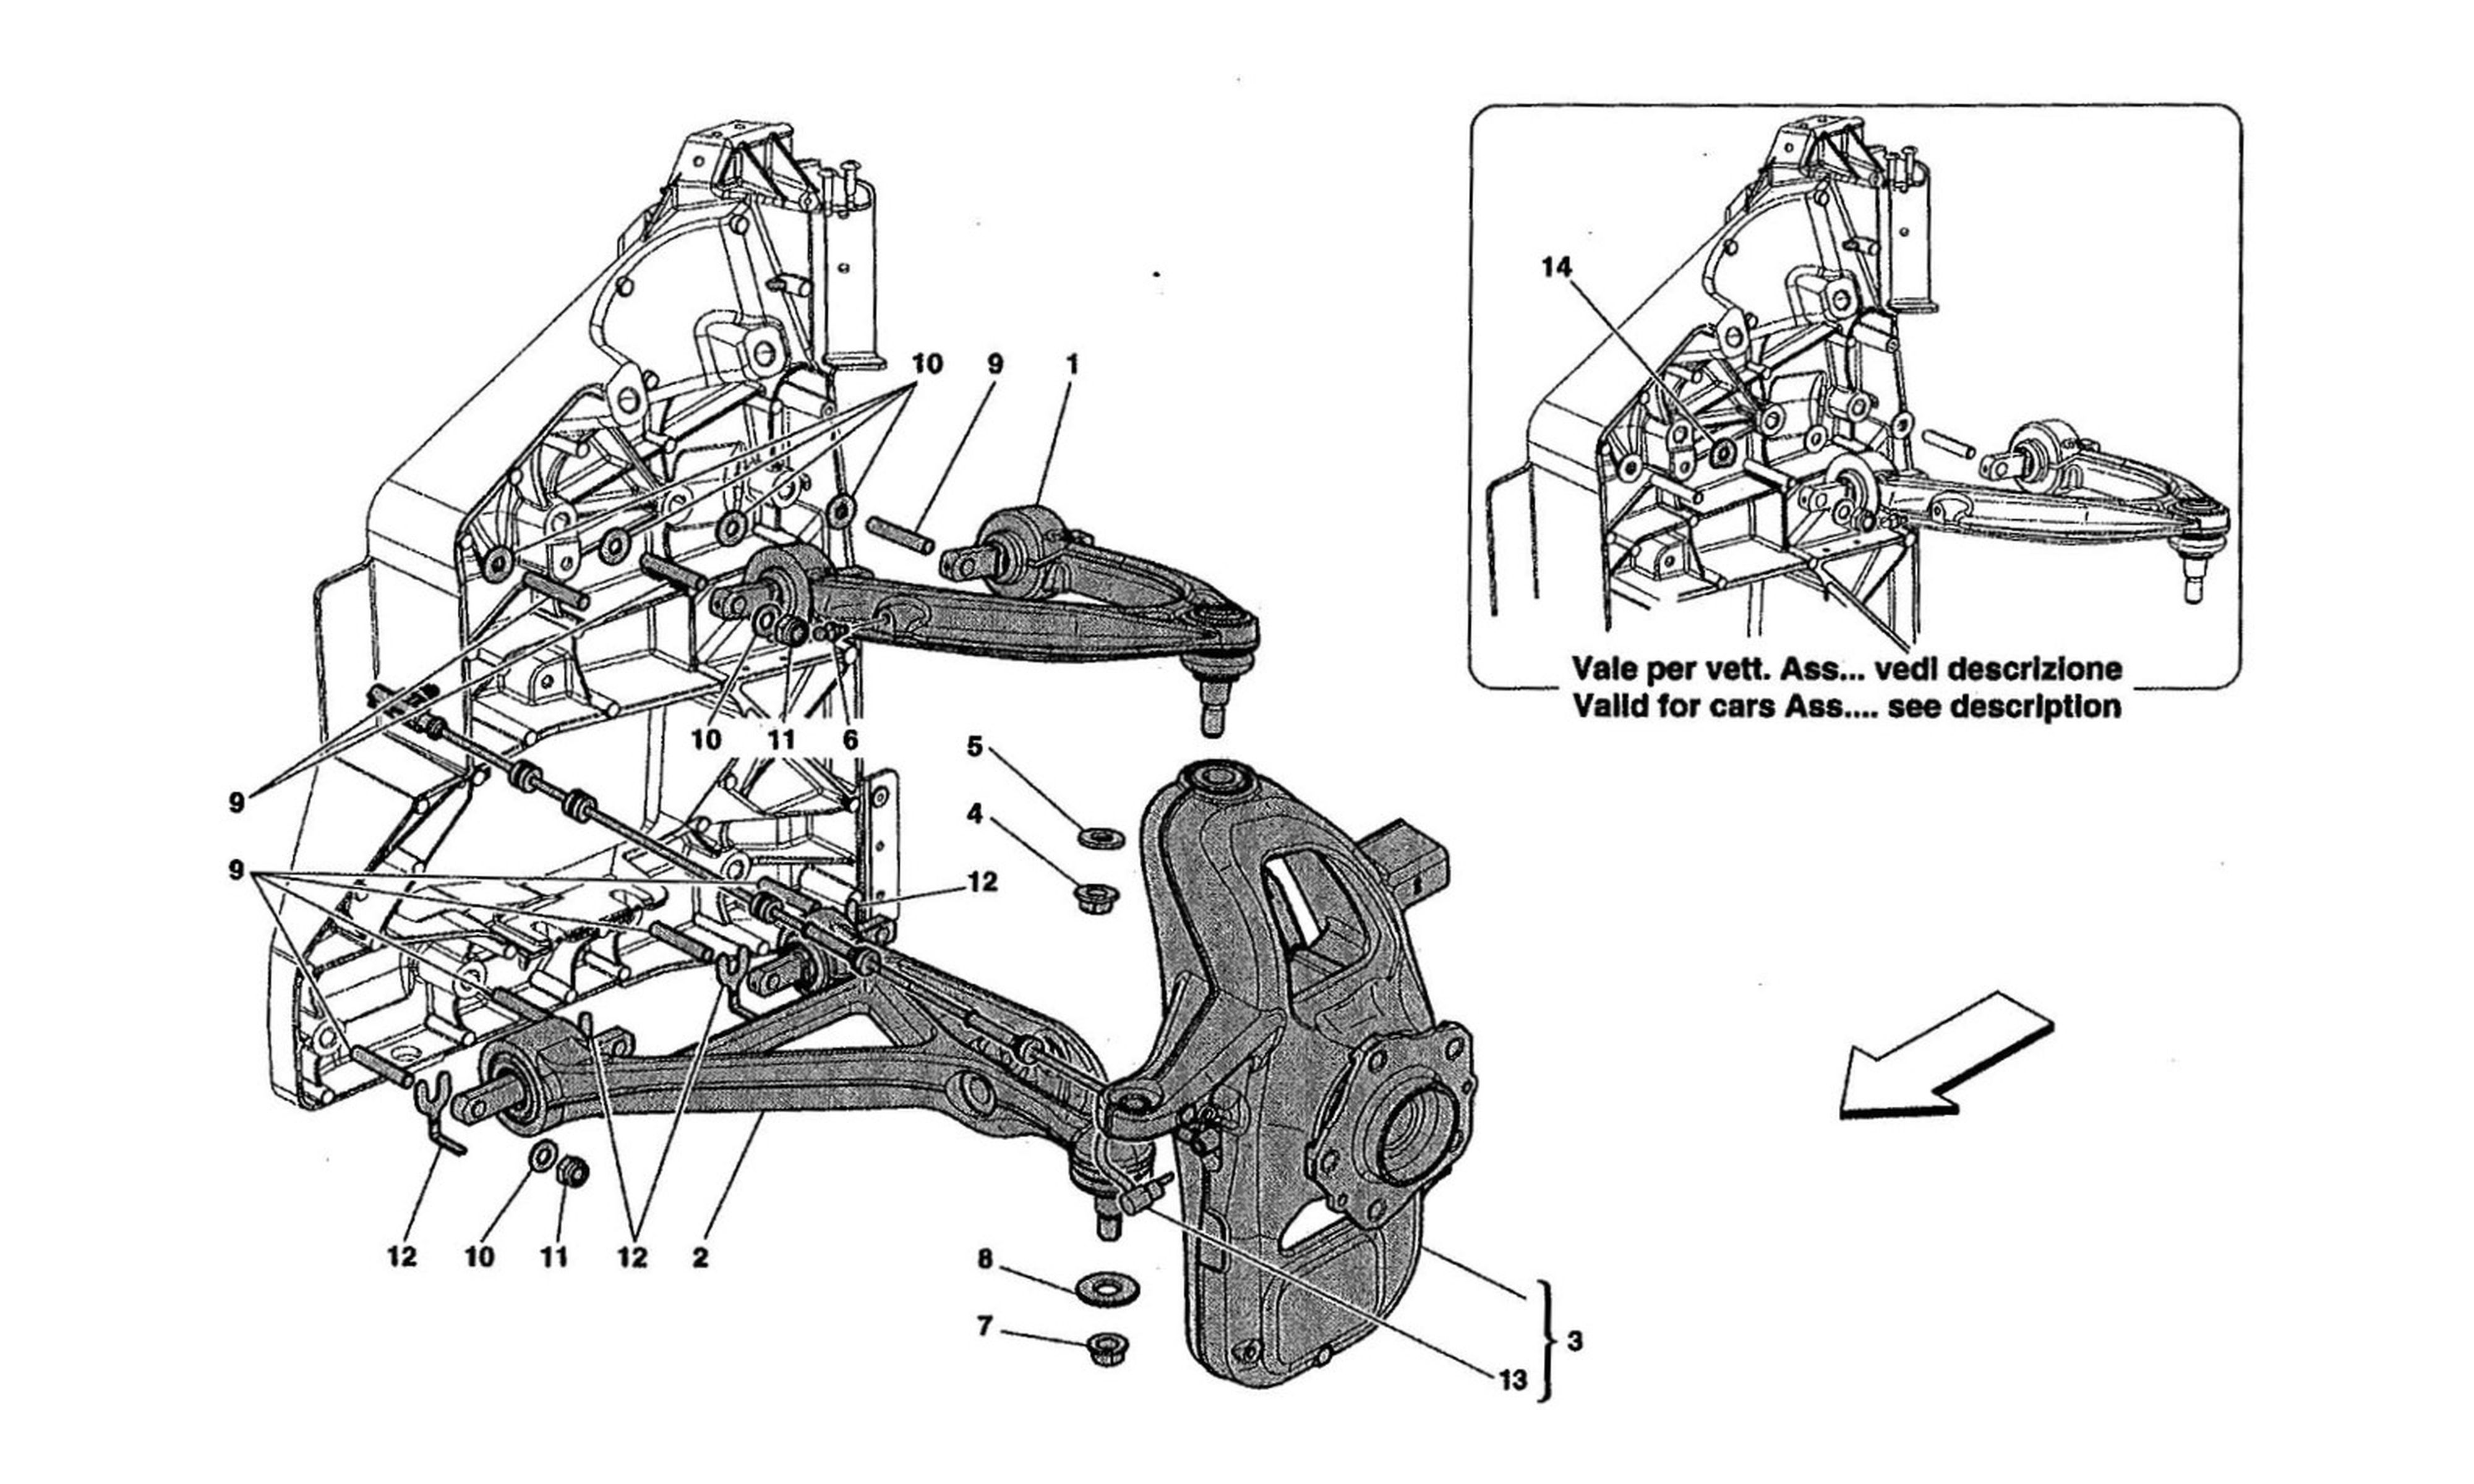 Schematic: Front Suspension - Arms